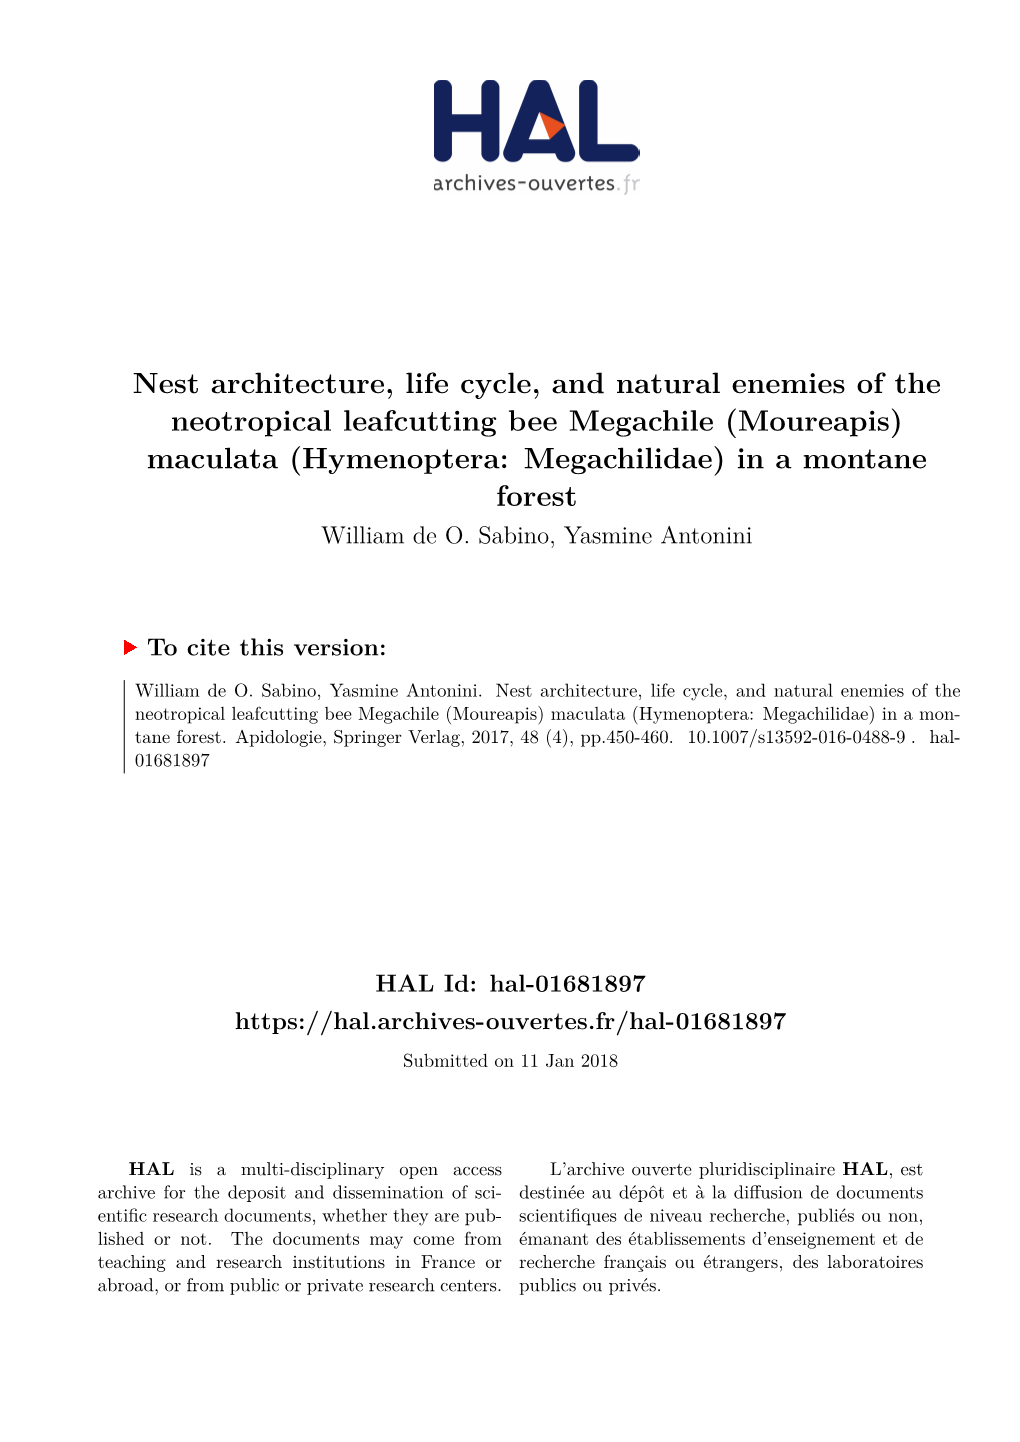 Nest Architecture, Life Cycle, and Natural